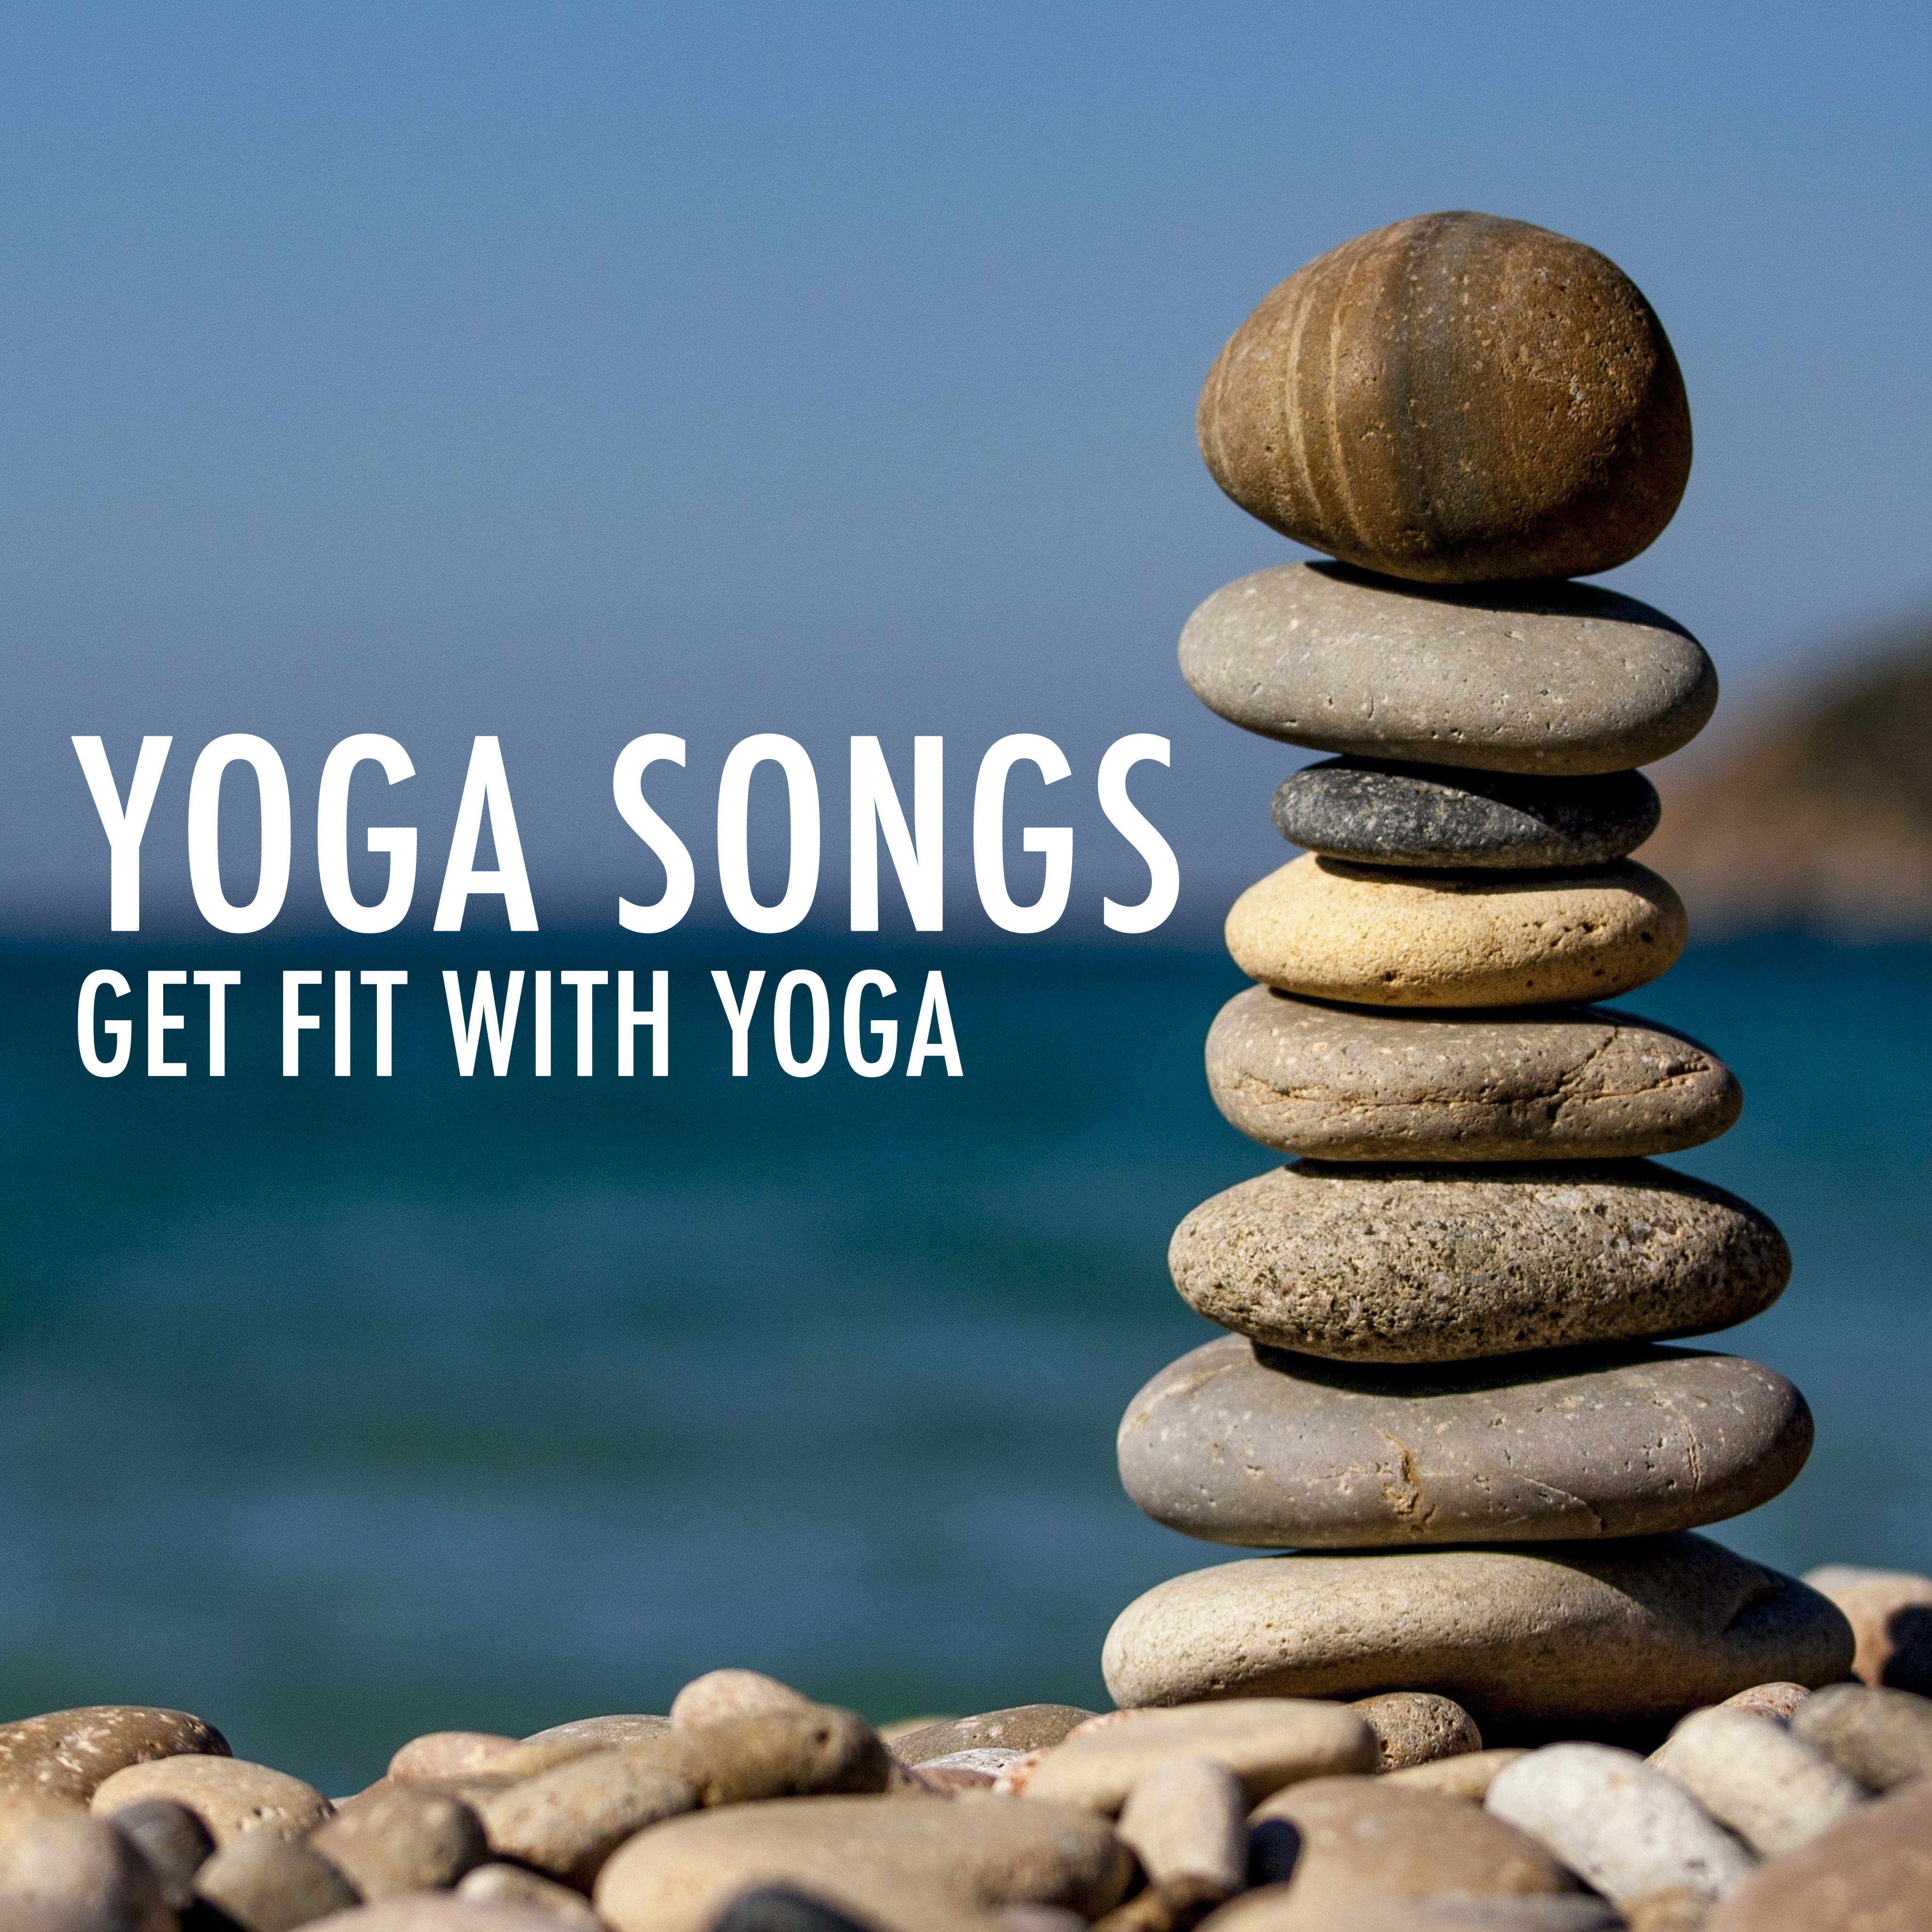 13 Yoga Songs - Get Fit with Yoga